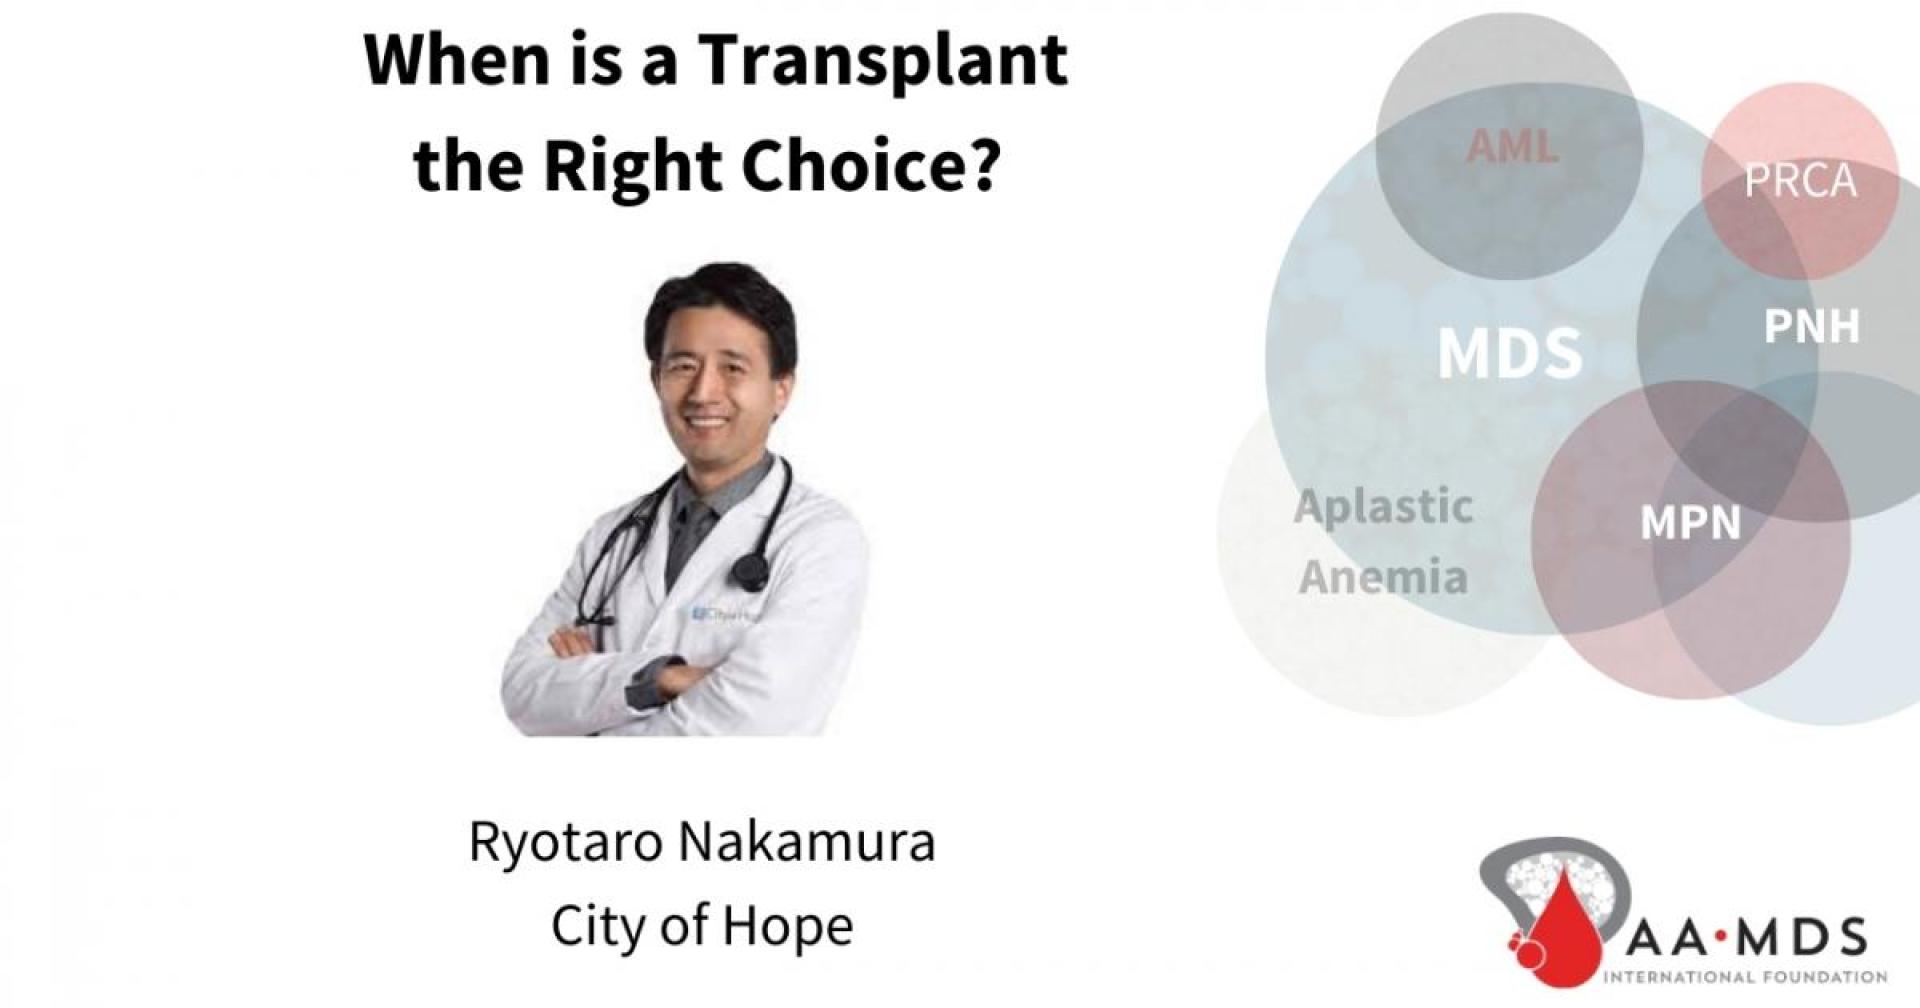 when is transplant the right choice?